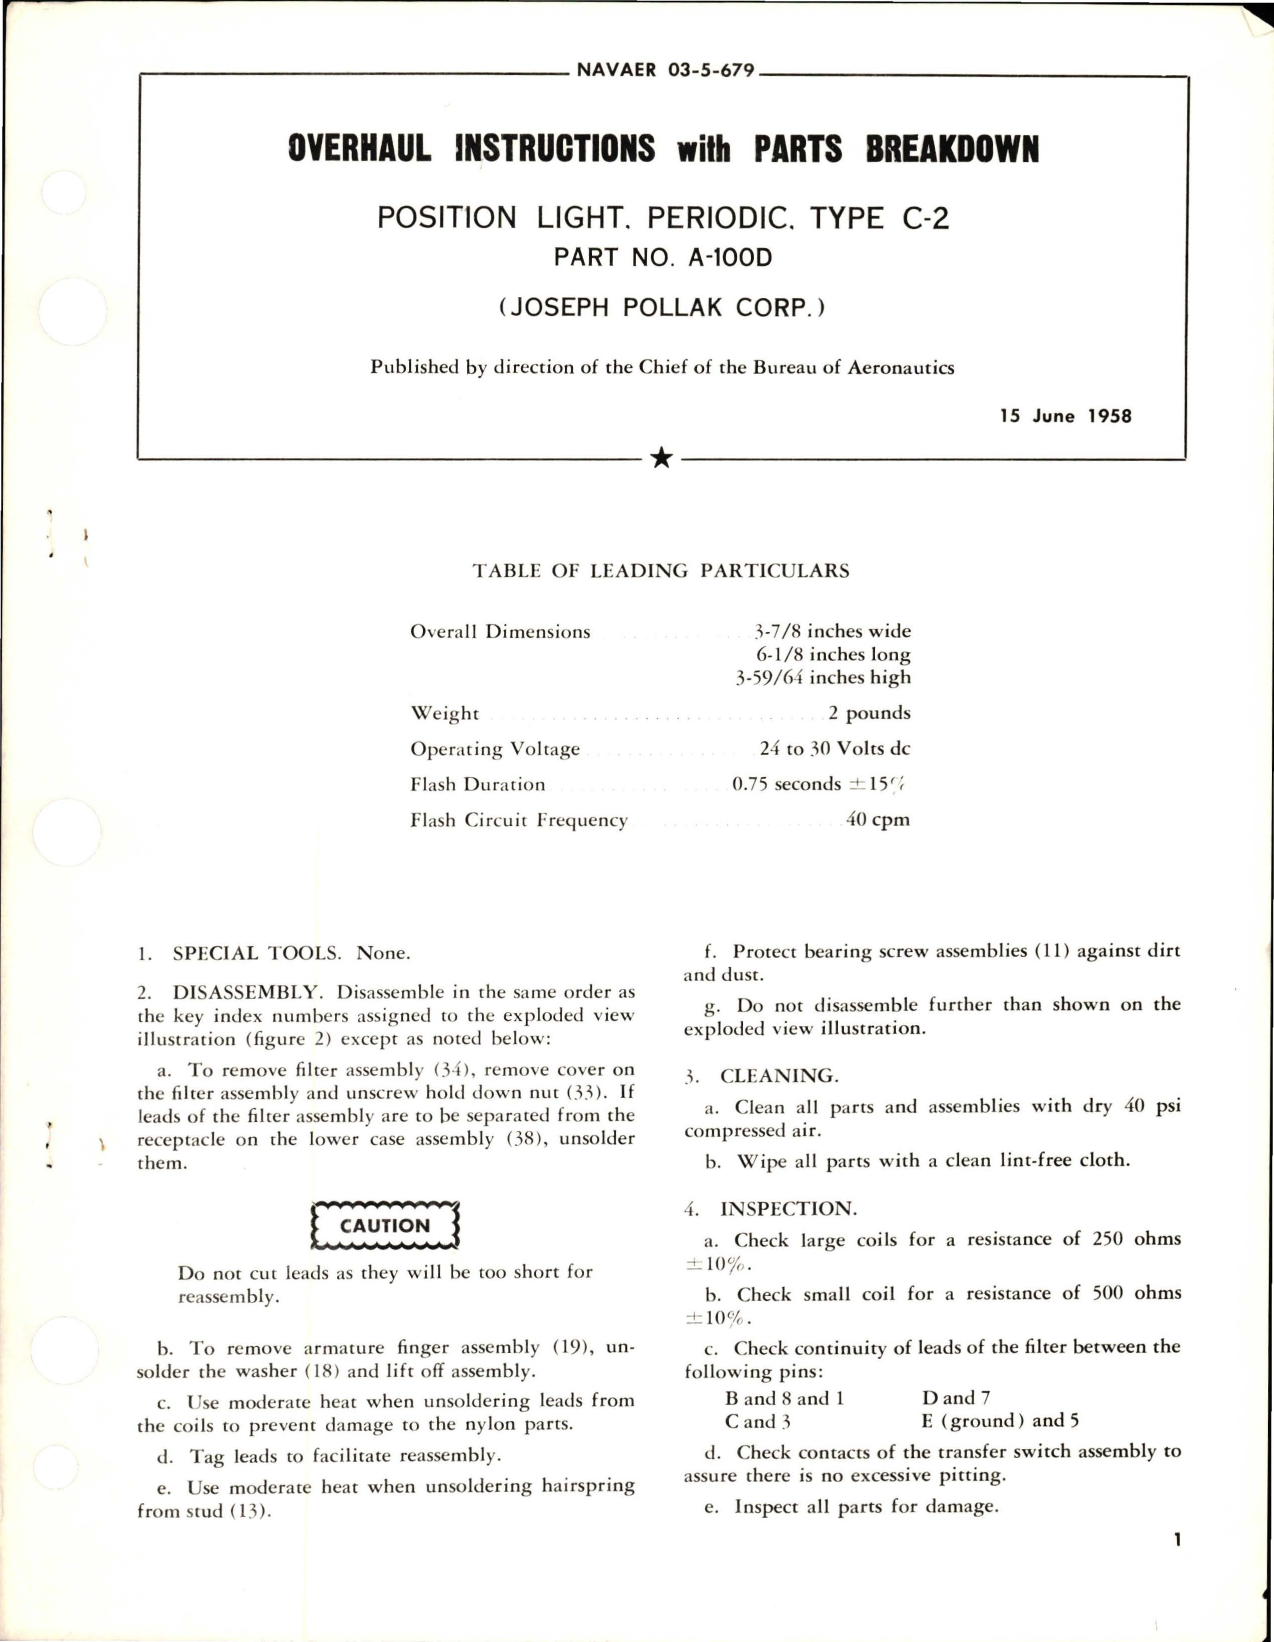 Sample page 1 from AirCorps Library document: Overhaul Instructions with Parts Breakdown for Periodic Position Light - Type C-2 - Part A-100D 